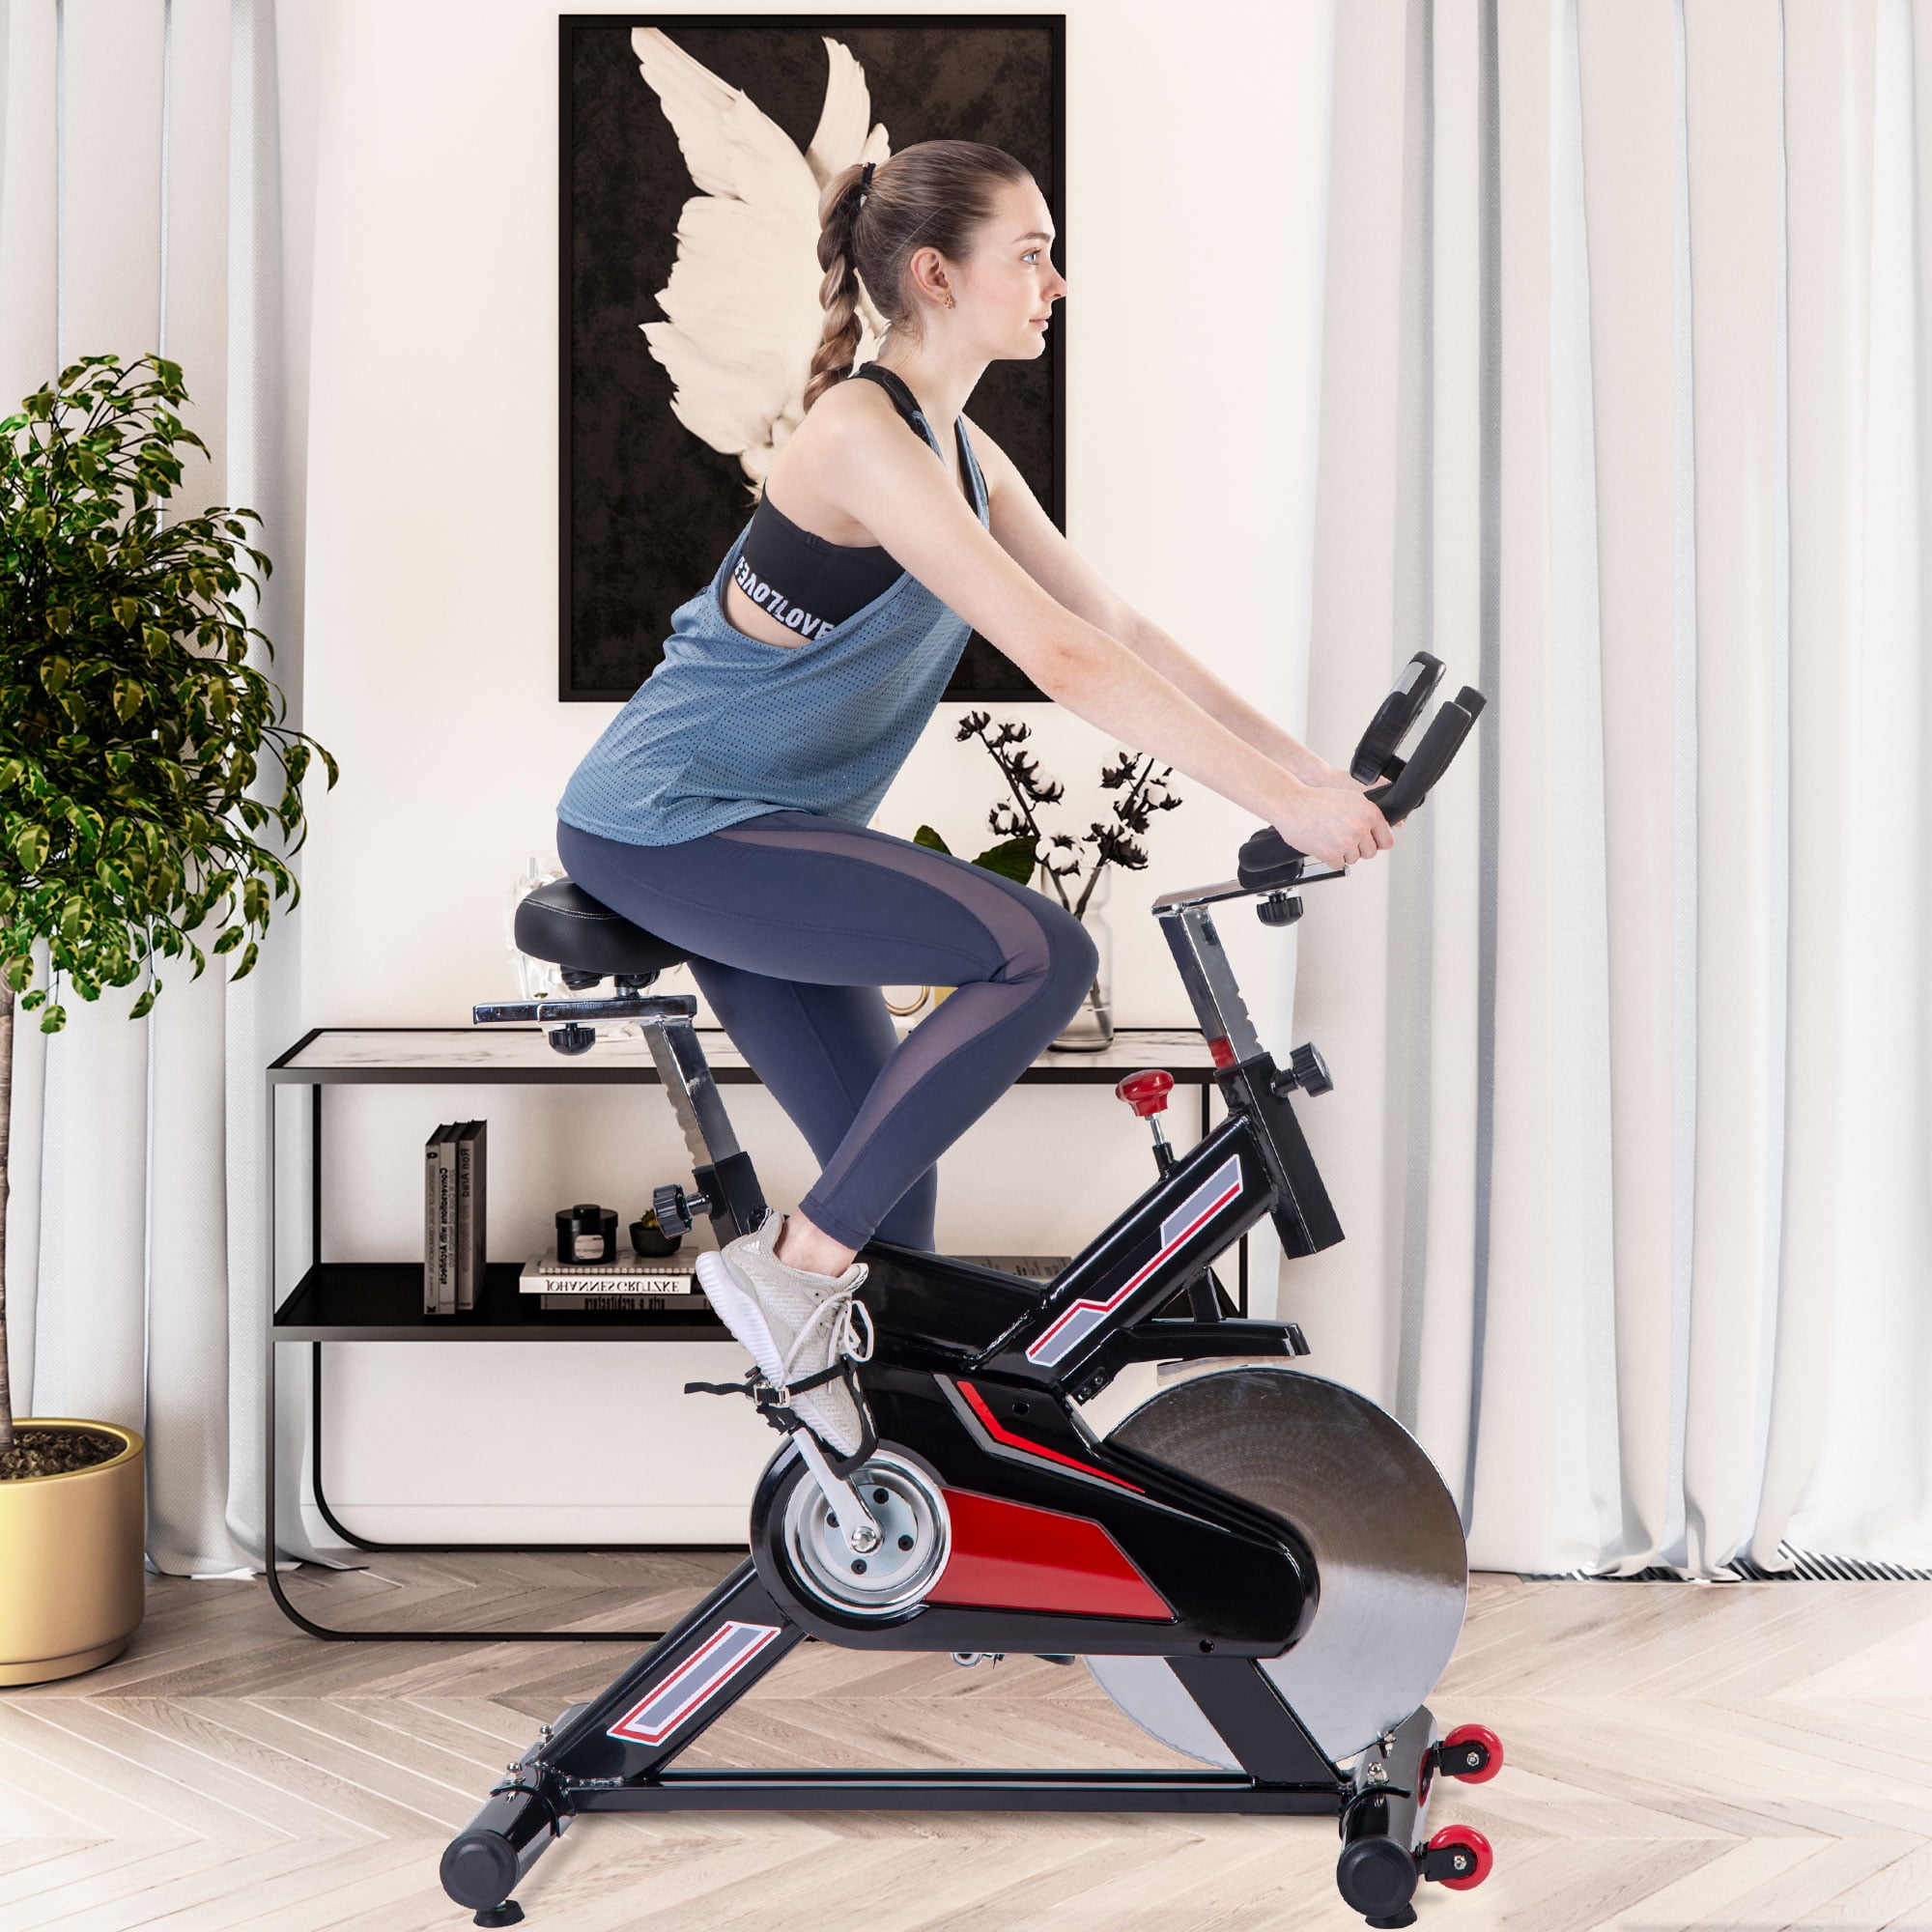 Adjustable Bike Indoor Exercise Bike Gym Training Cycle Home Fitness Workout 